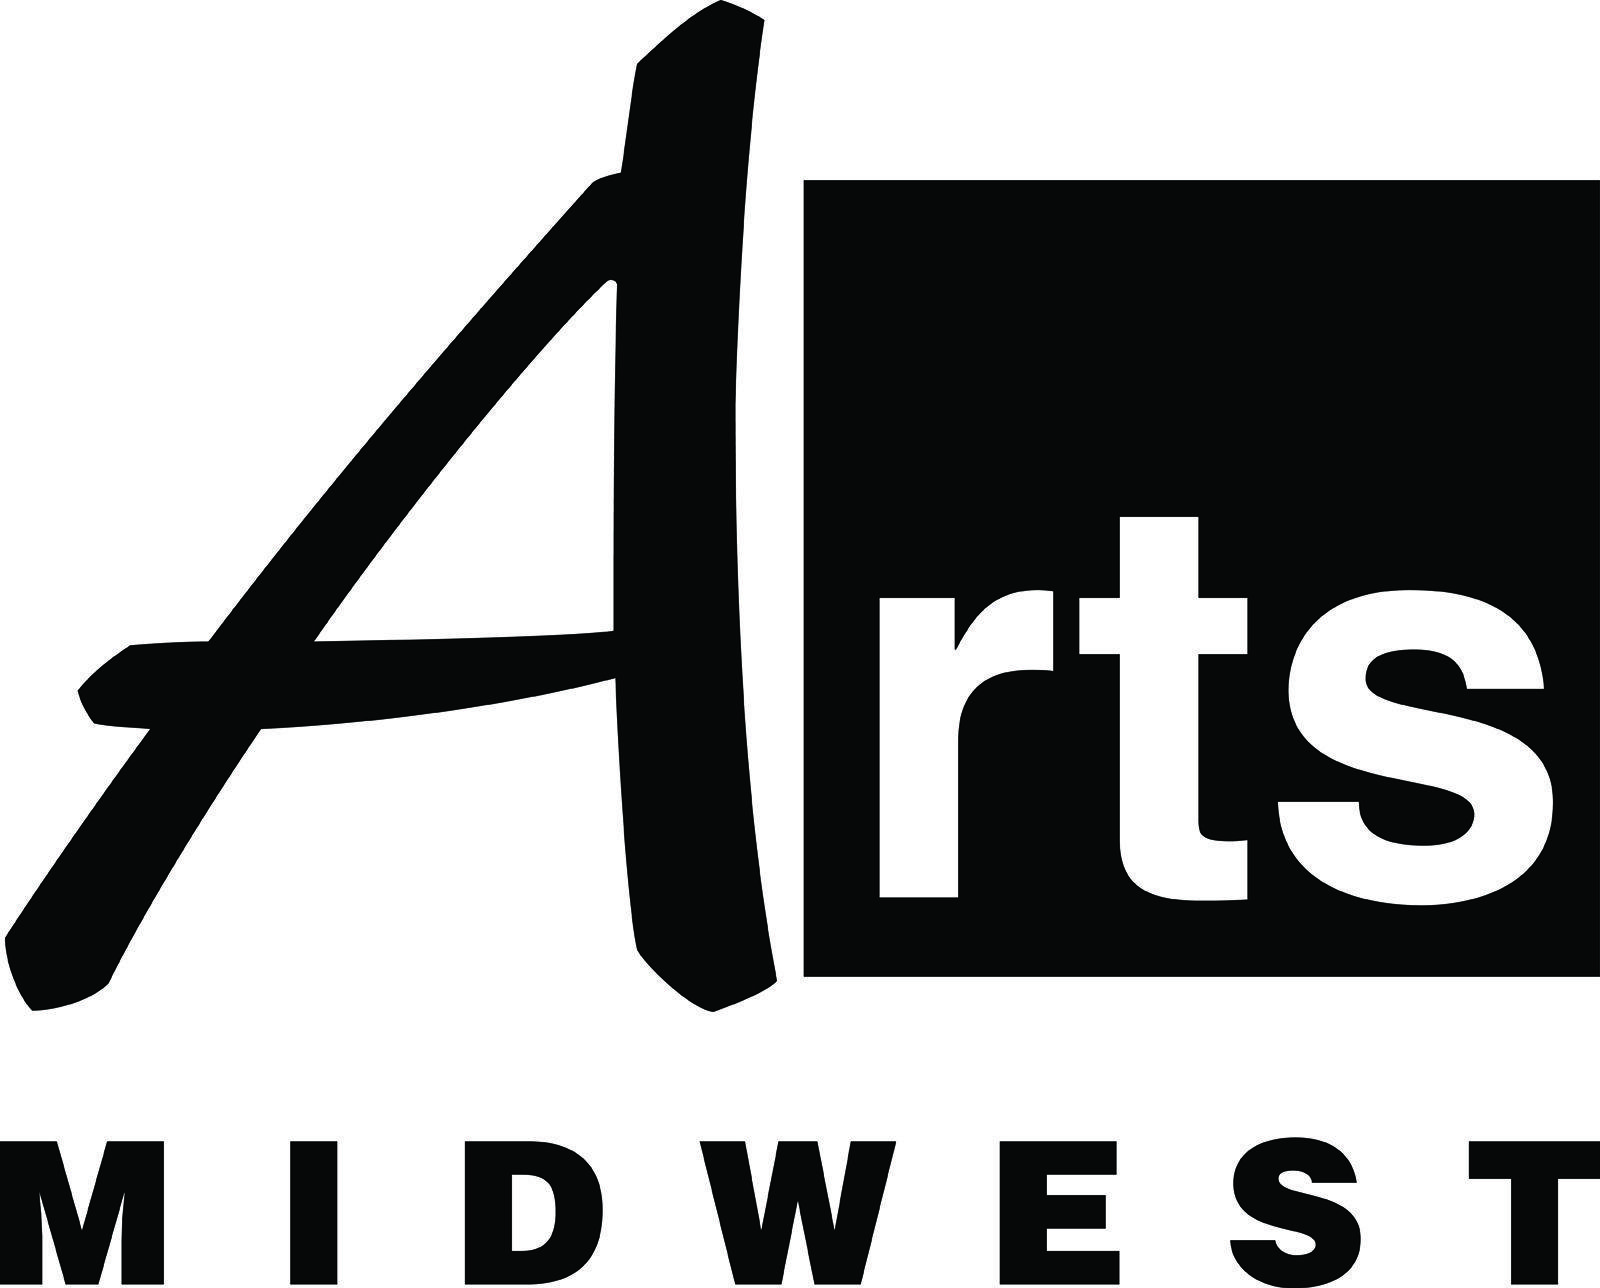 Black and White Cross Logo - Download Logos | Arts Midwest